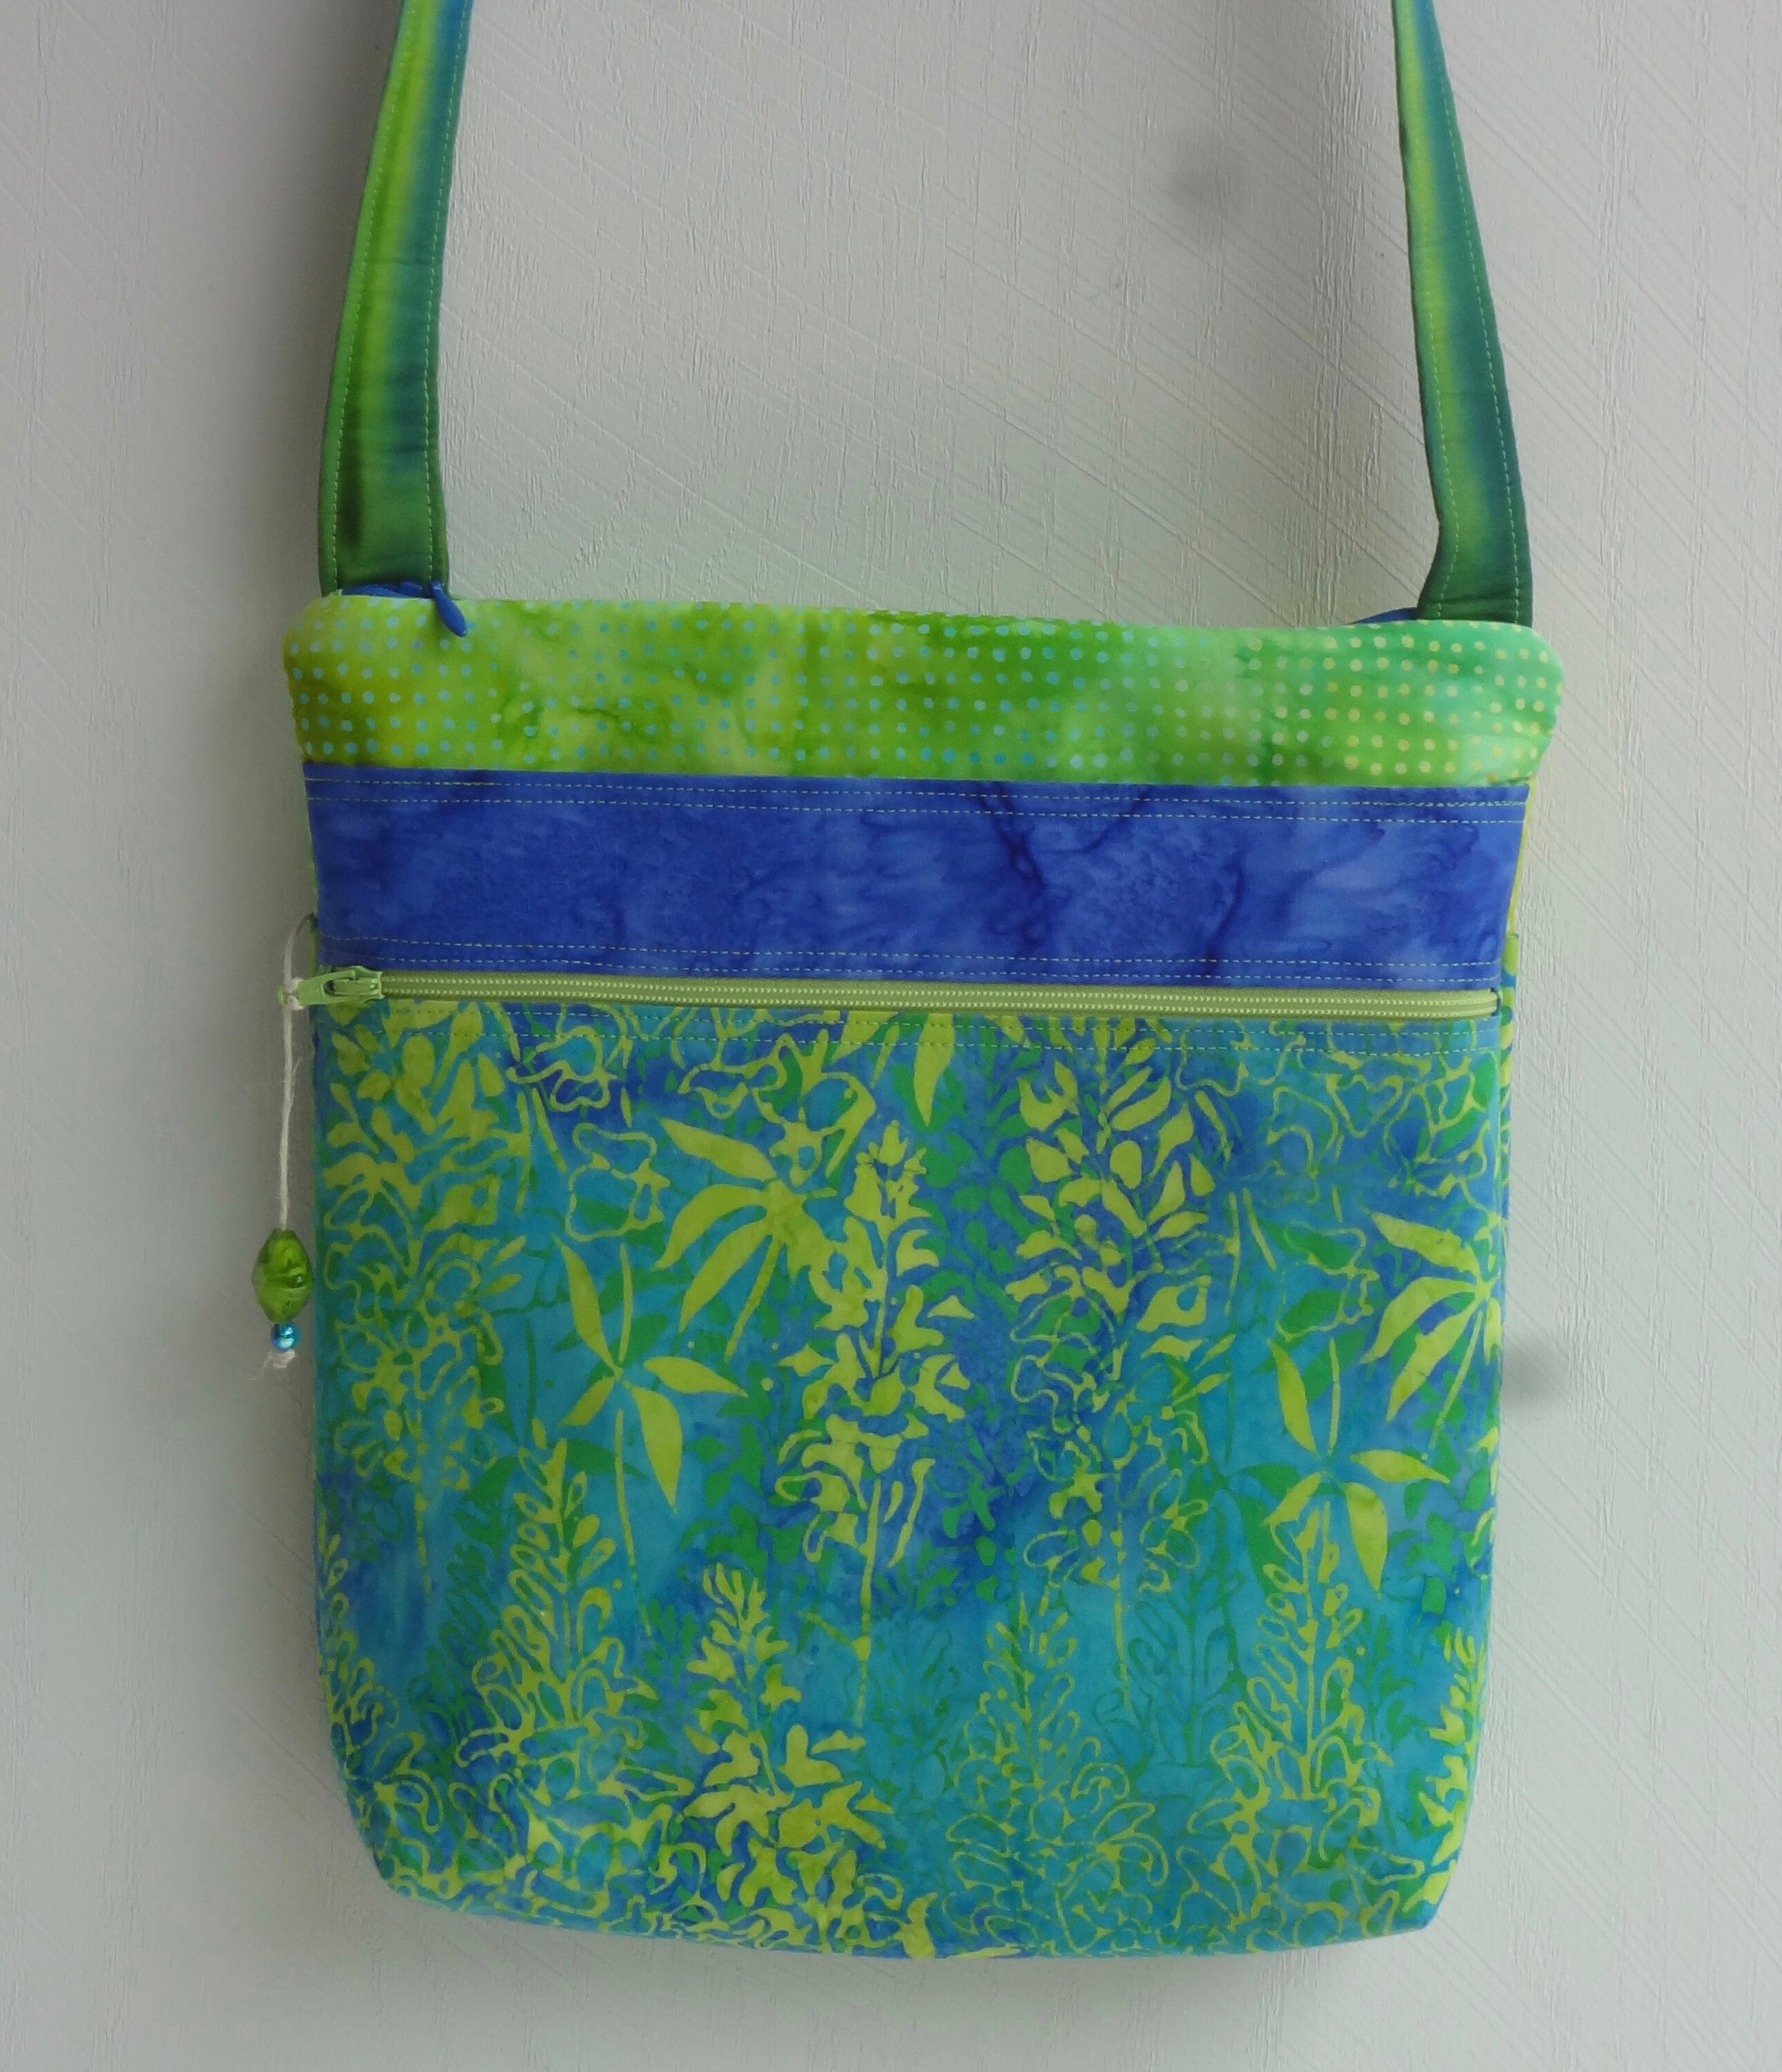 Lime Green and Blue Cross Body Bag / Tropical Purse Bag / - Etsy